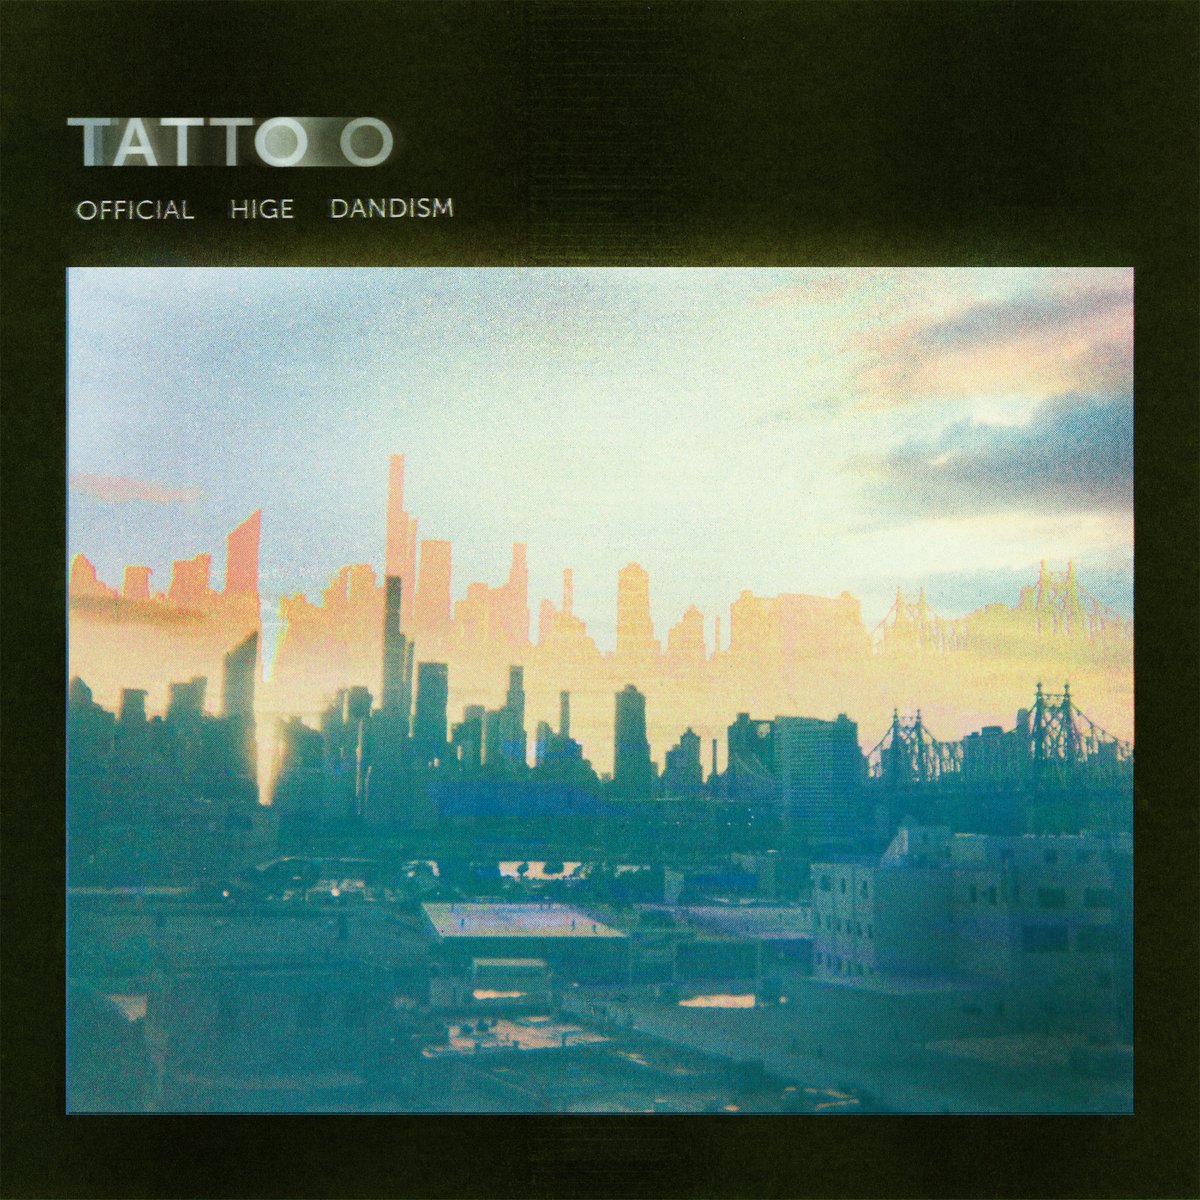 Cover art for『Official HIGE DANdism - TATTOO』from the release『TATTOO』